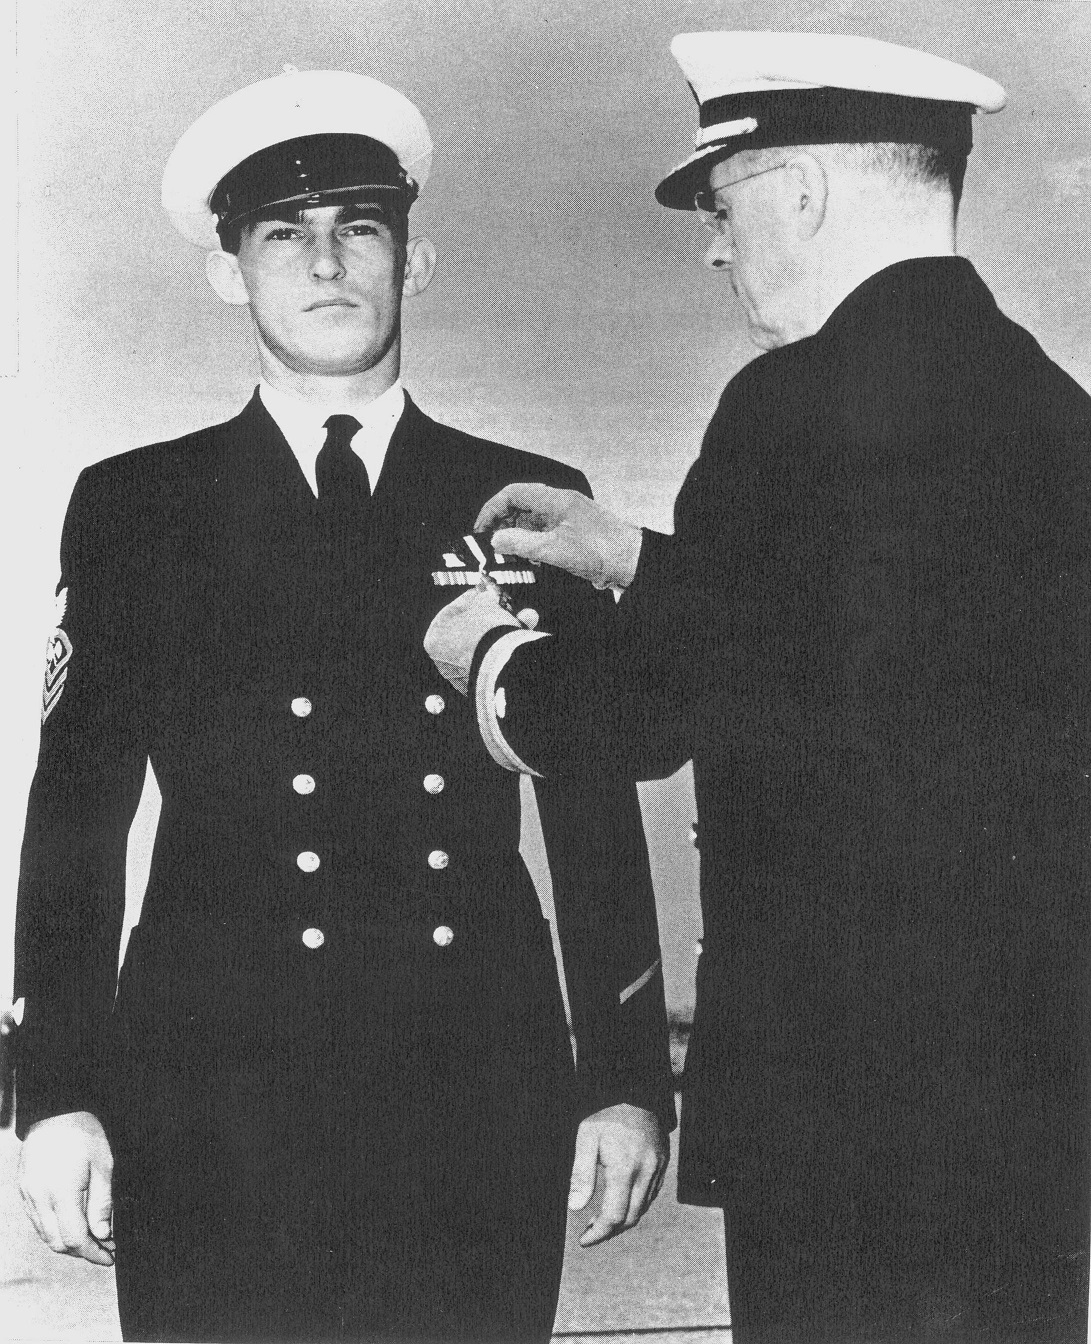 8.	Ray Evans receiving his Navy Cross Medal for action seen at Point Cruz. Evans had already received a battlefield advancement to chief petty officer and later received an officer’s commission. (Coast Guard Collection)